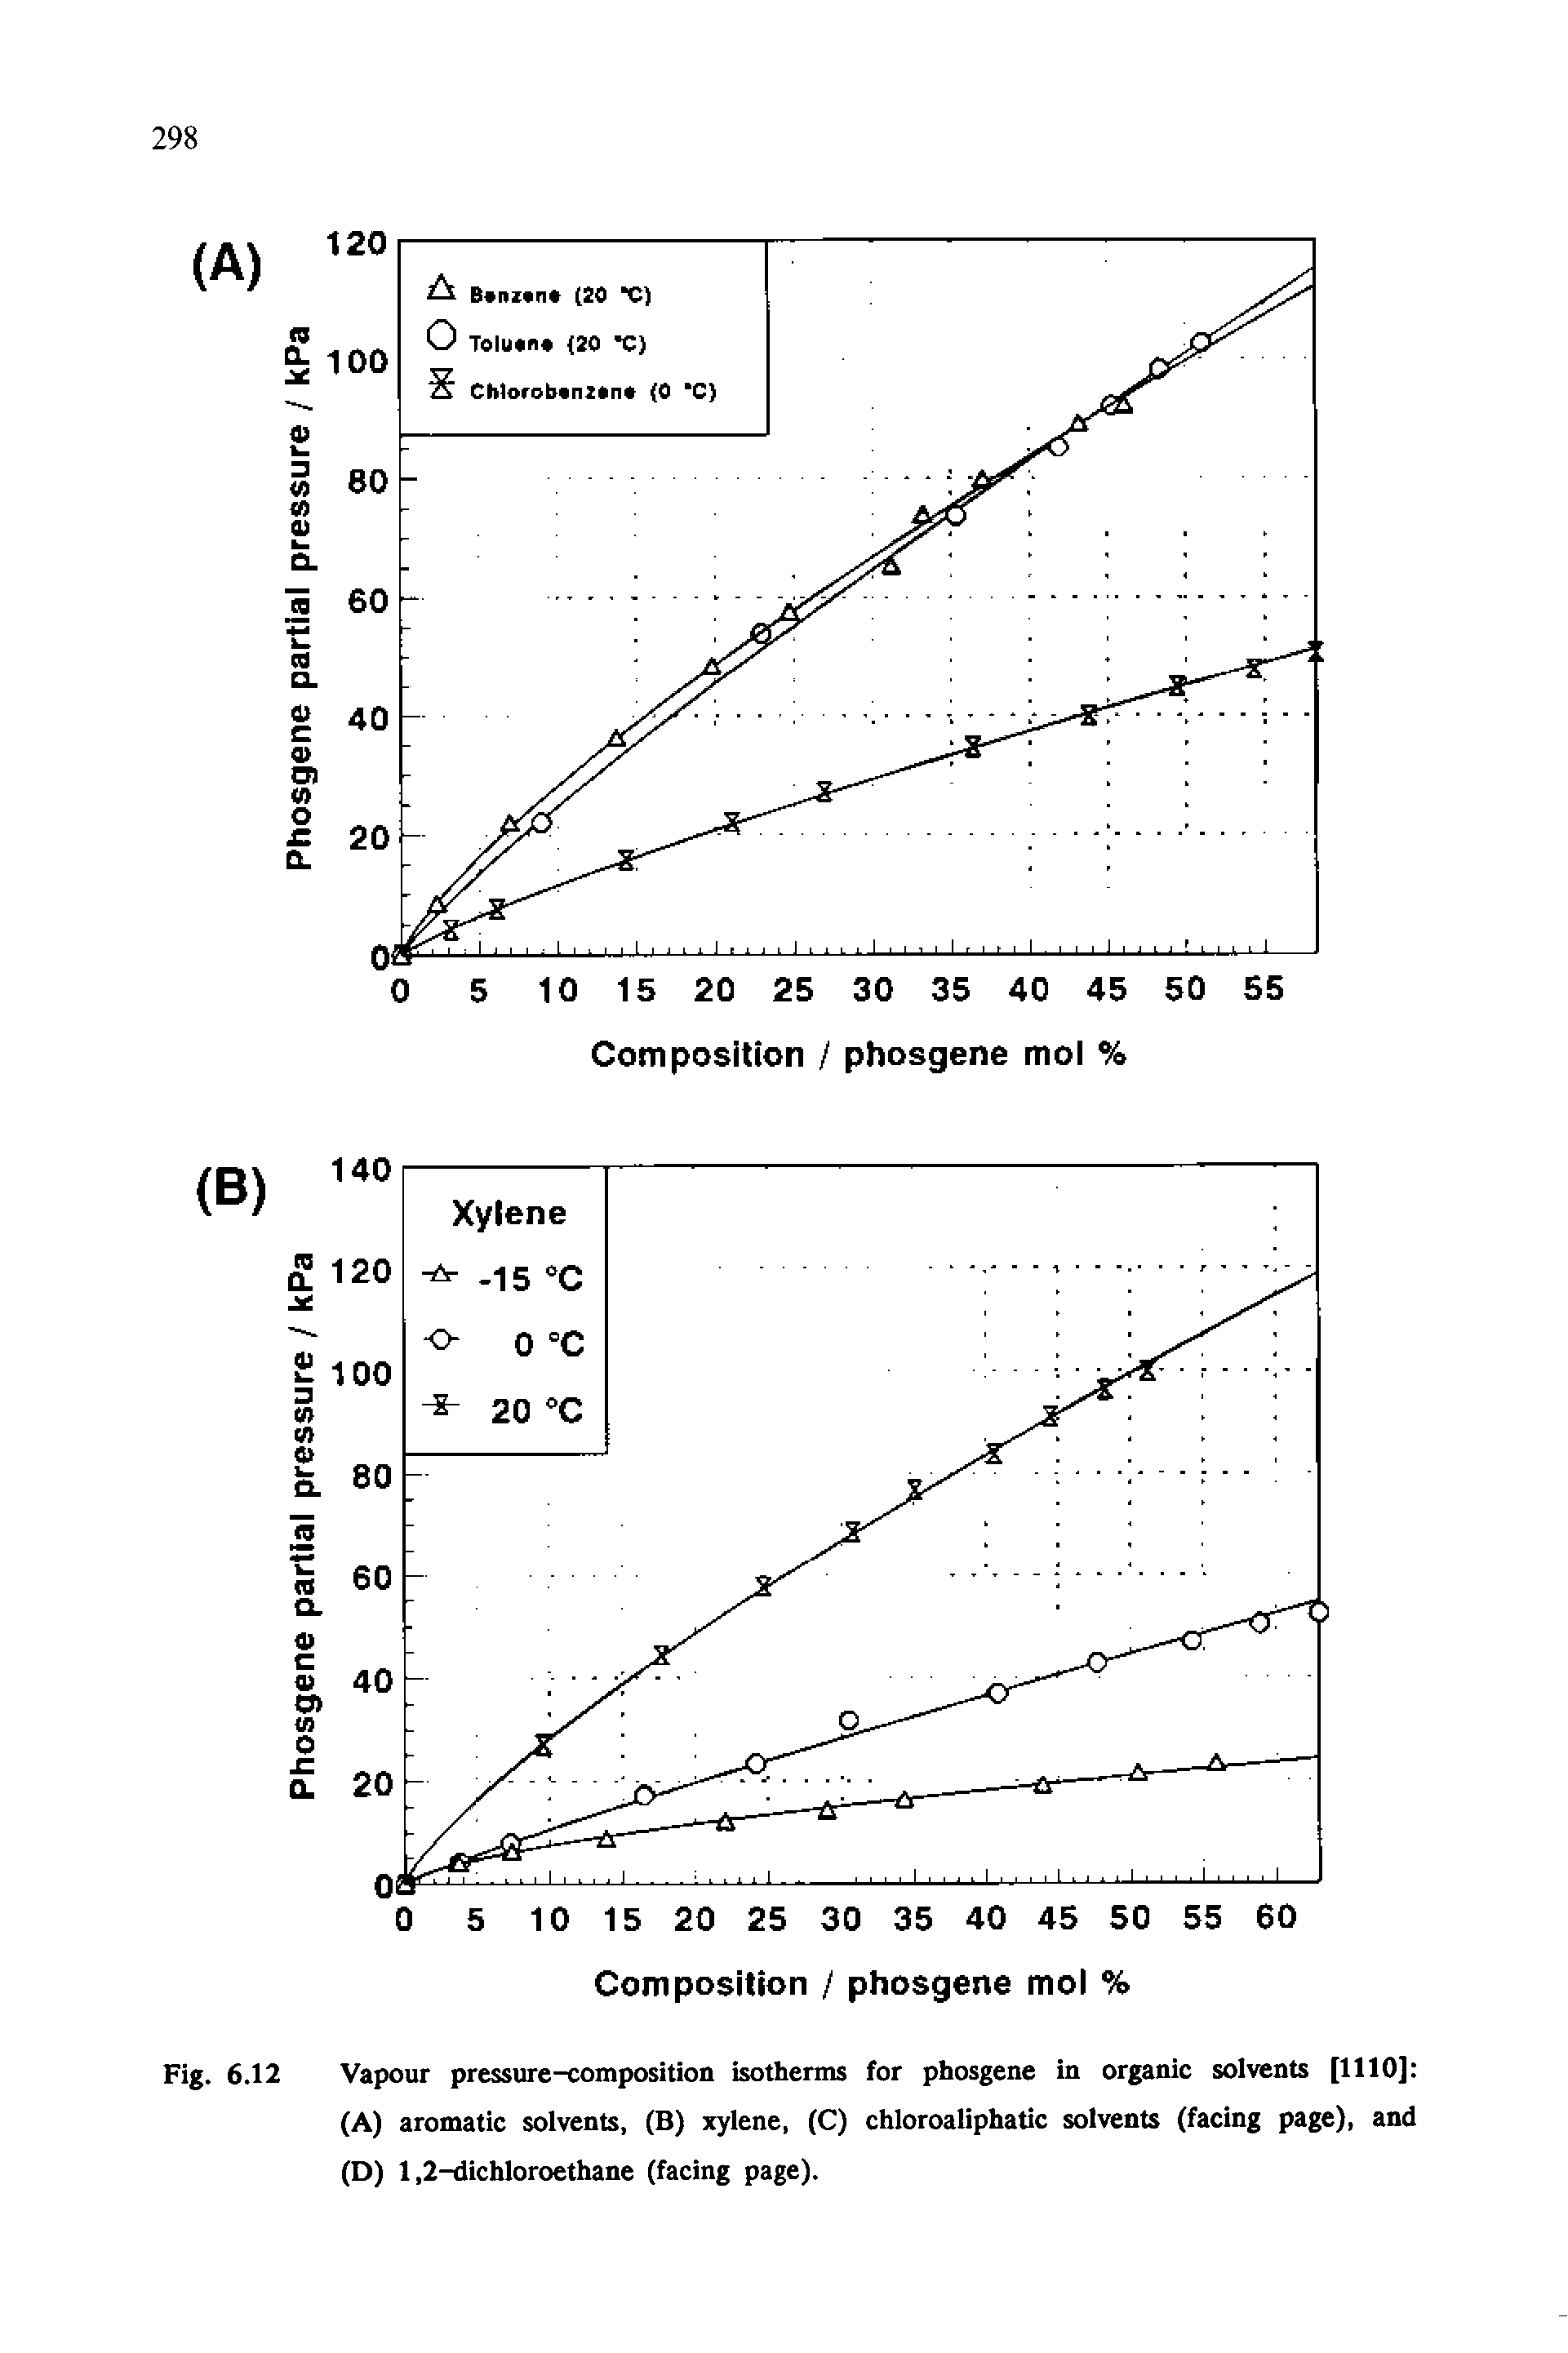 Fig. 6.12 Vapour pressure-composition isotherms for phosgene in organic solvents [1110] (A) aromatic solvents, (B) xylene, (C) chloroaliphatic solvents (facing page), and (D) 1,2-dichloroethane (facing page).